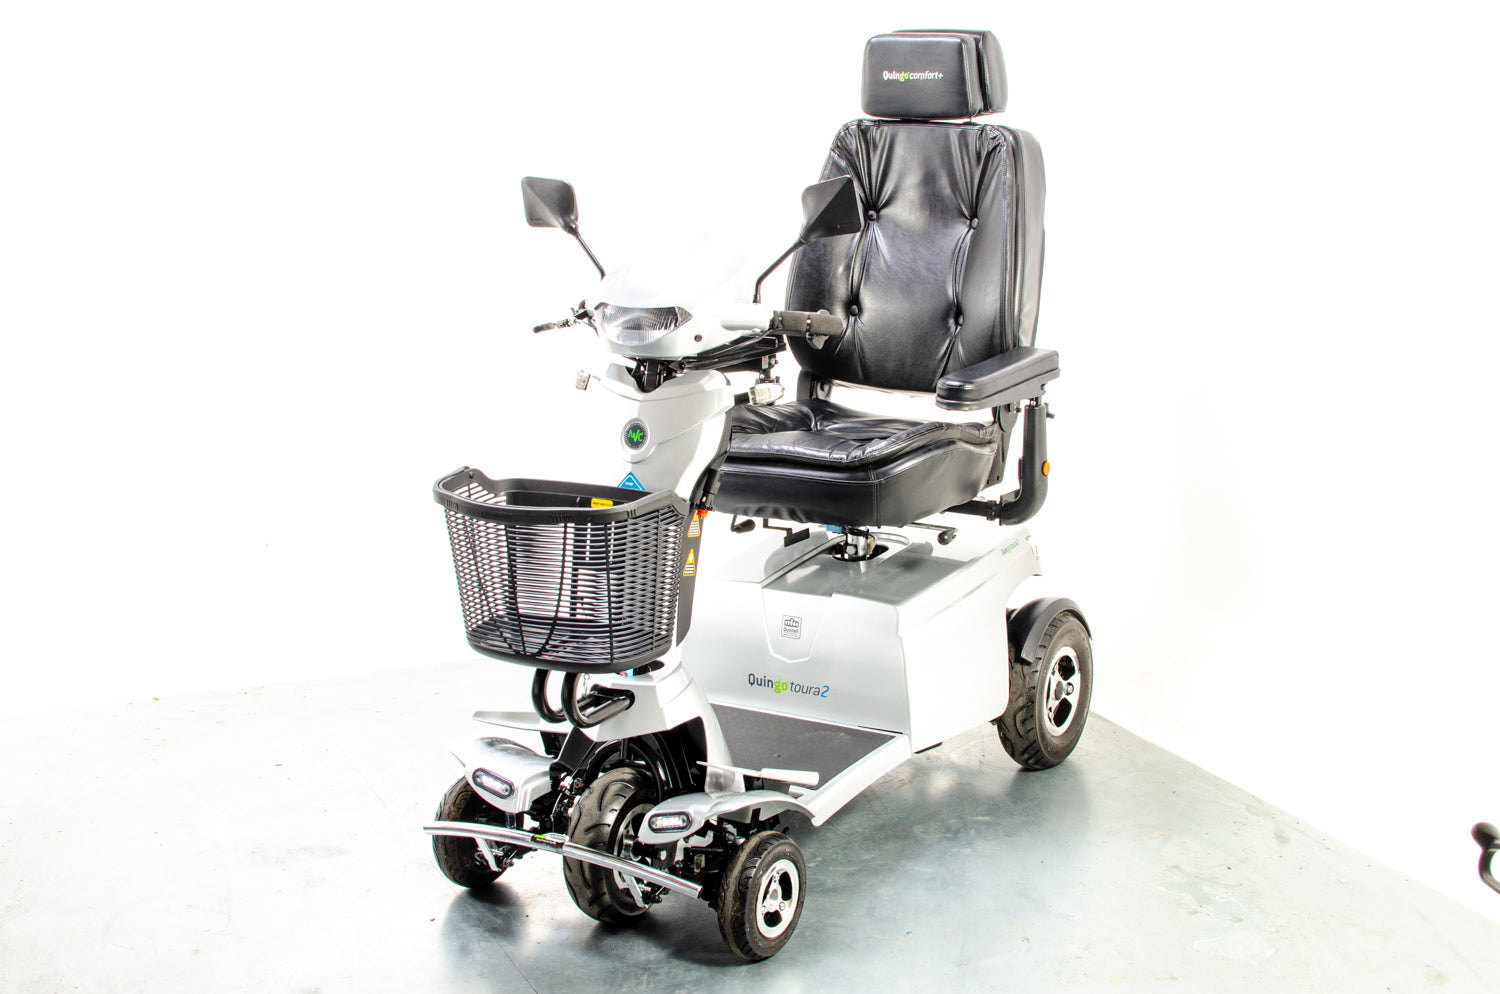 Quingo Toura 2 Used Mobility Scooter Large 5 Wheel All Terrain 8mph AVC Silver